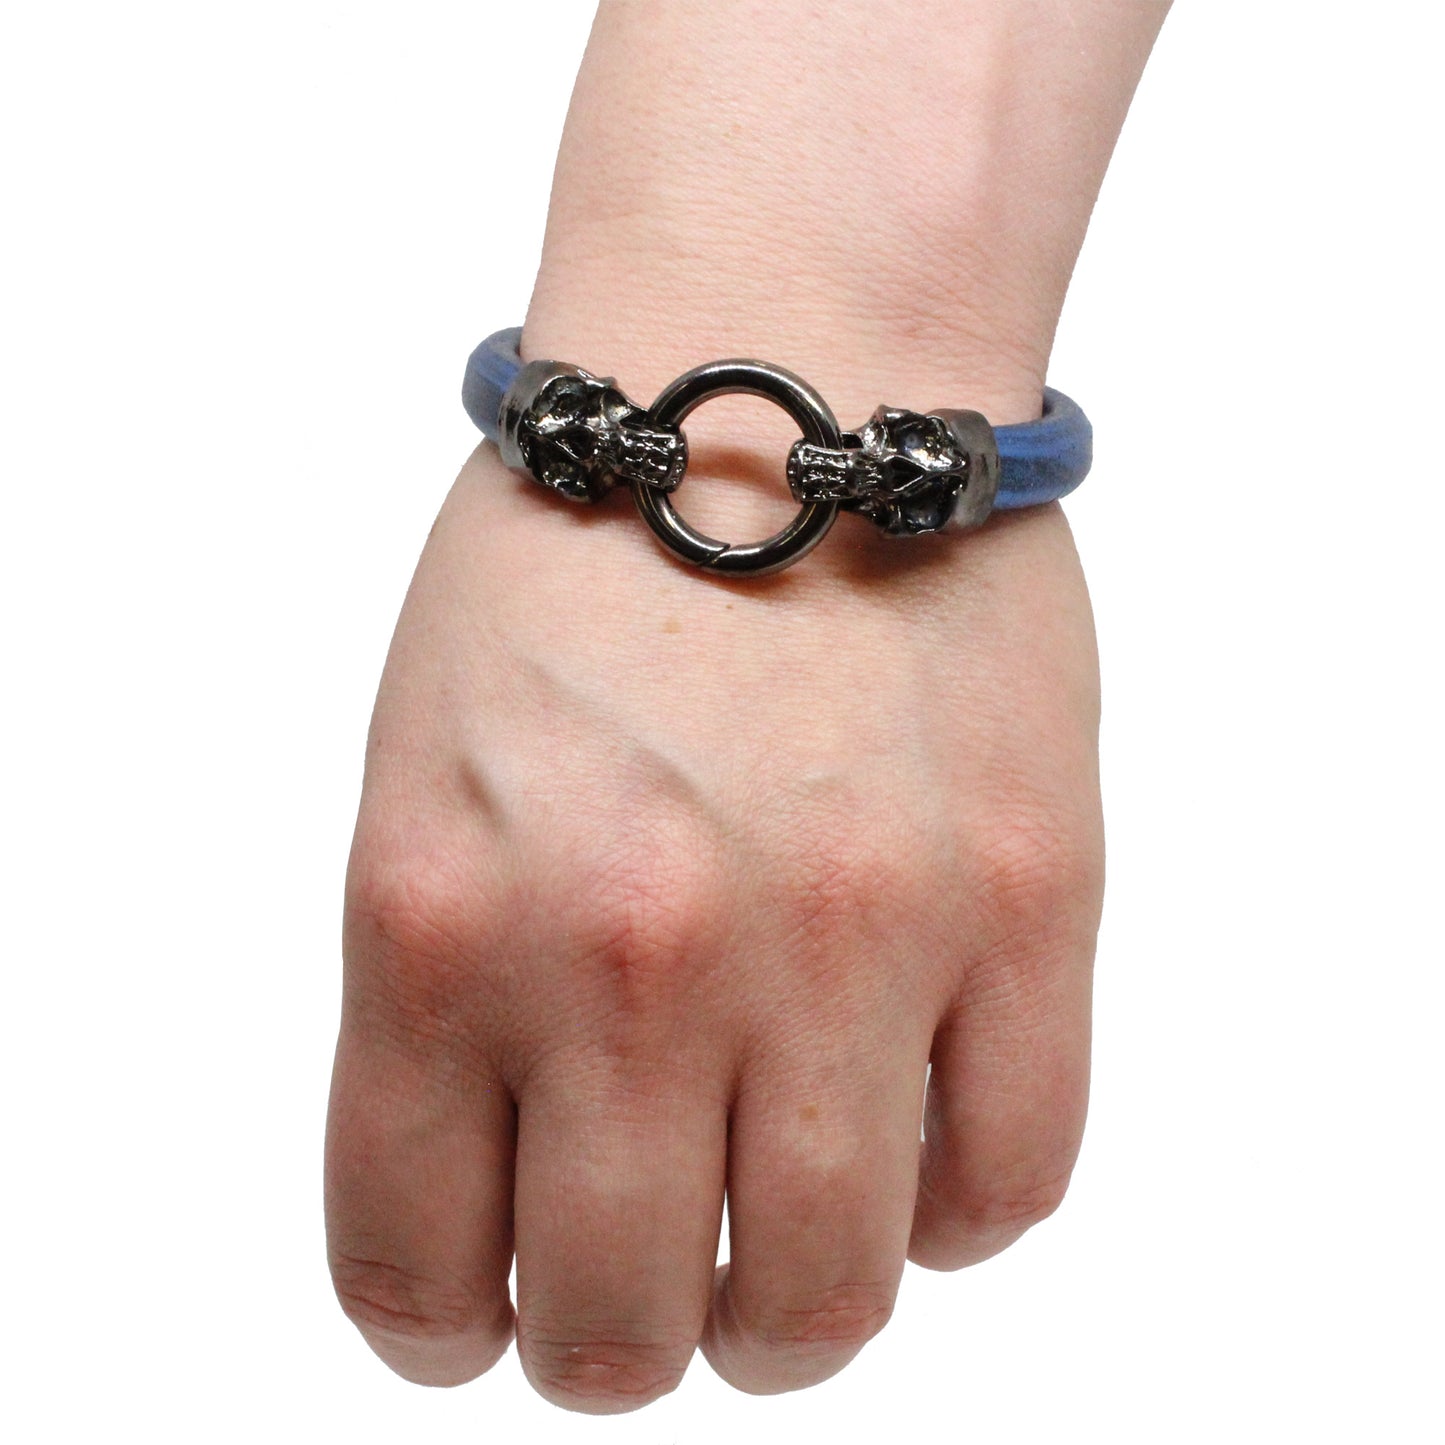 Skull and Ring Bracelet / 7.5 Inch wrist size / large black double skull clasp / blue leather cord